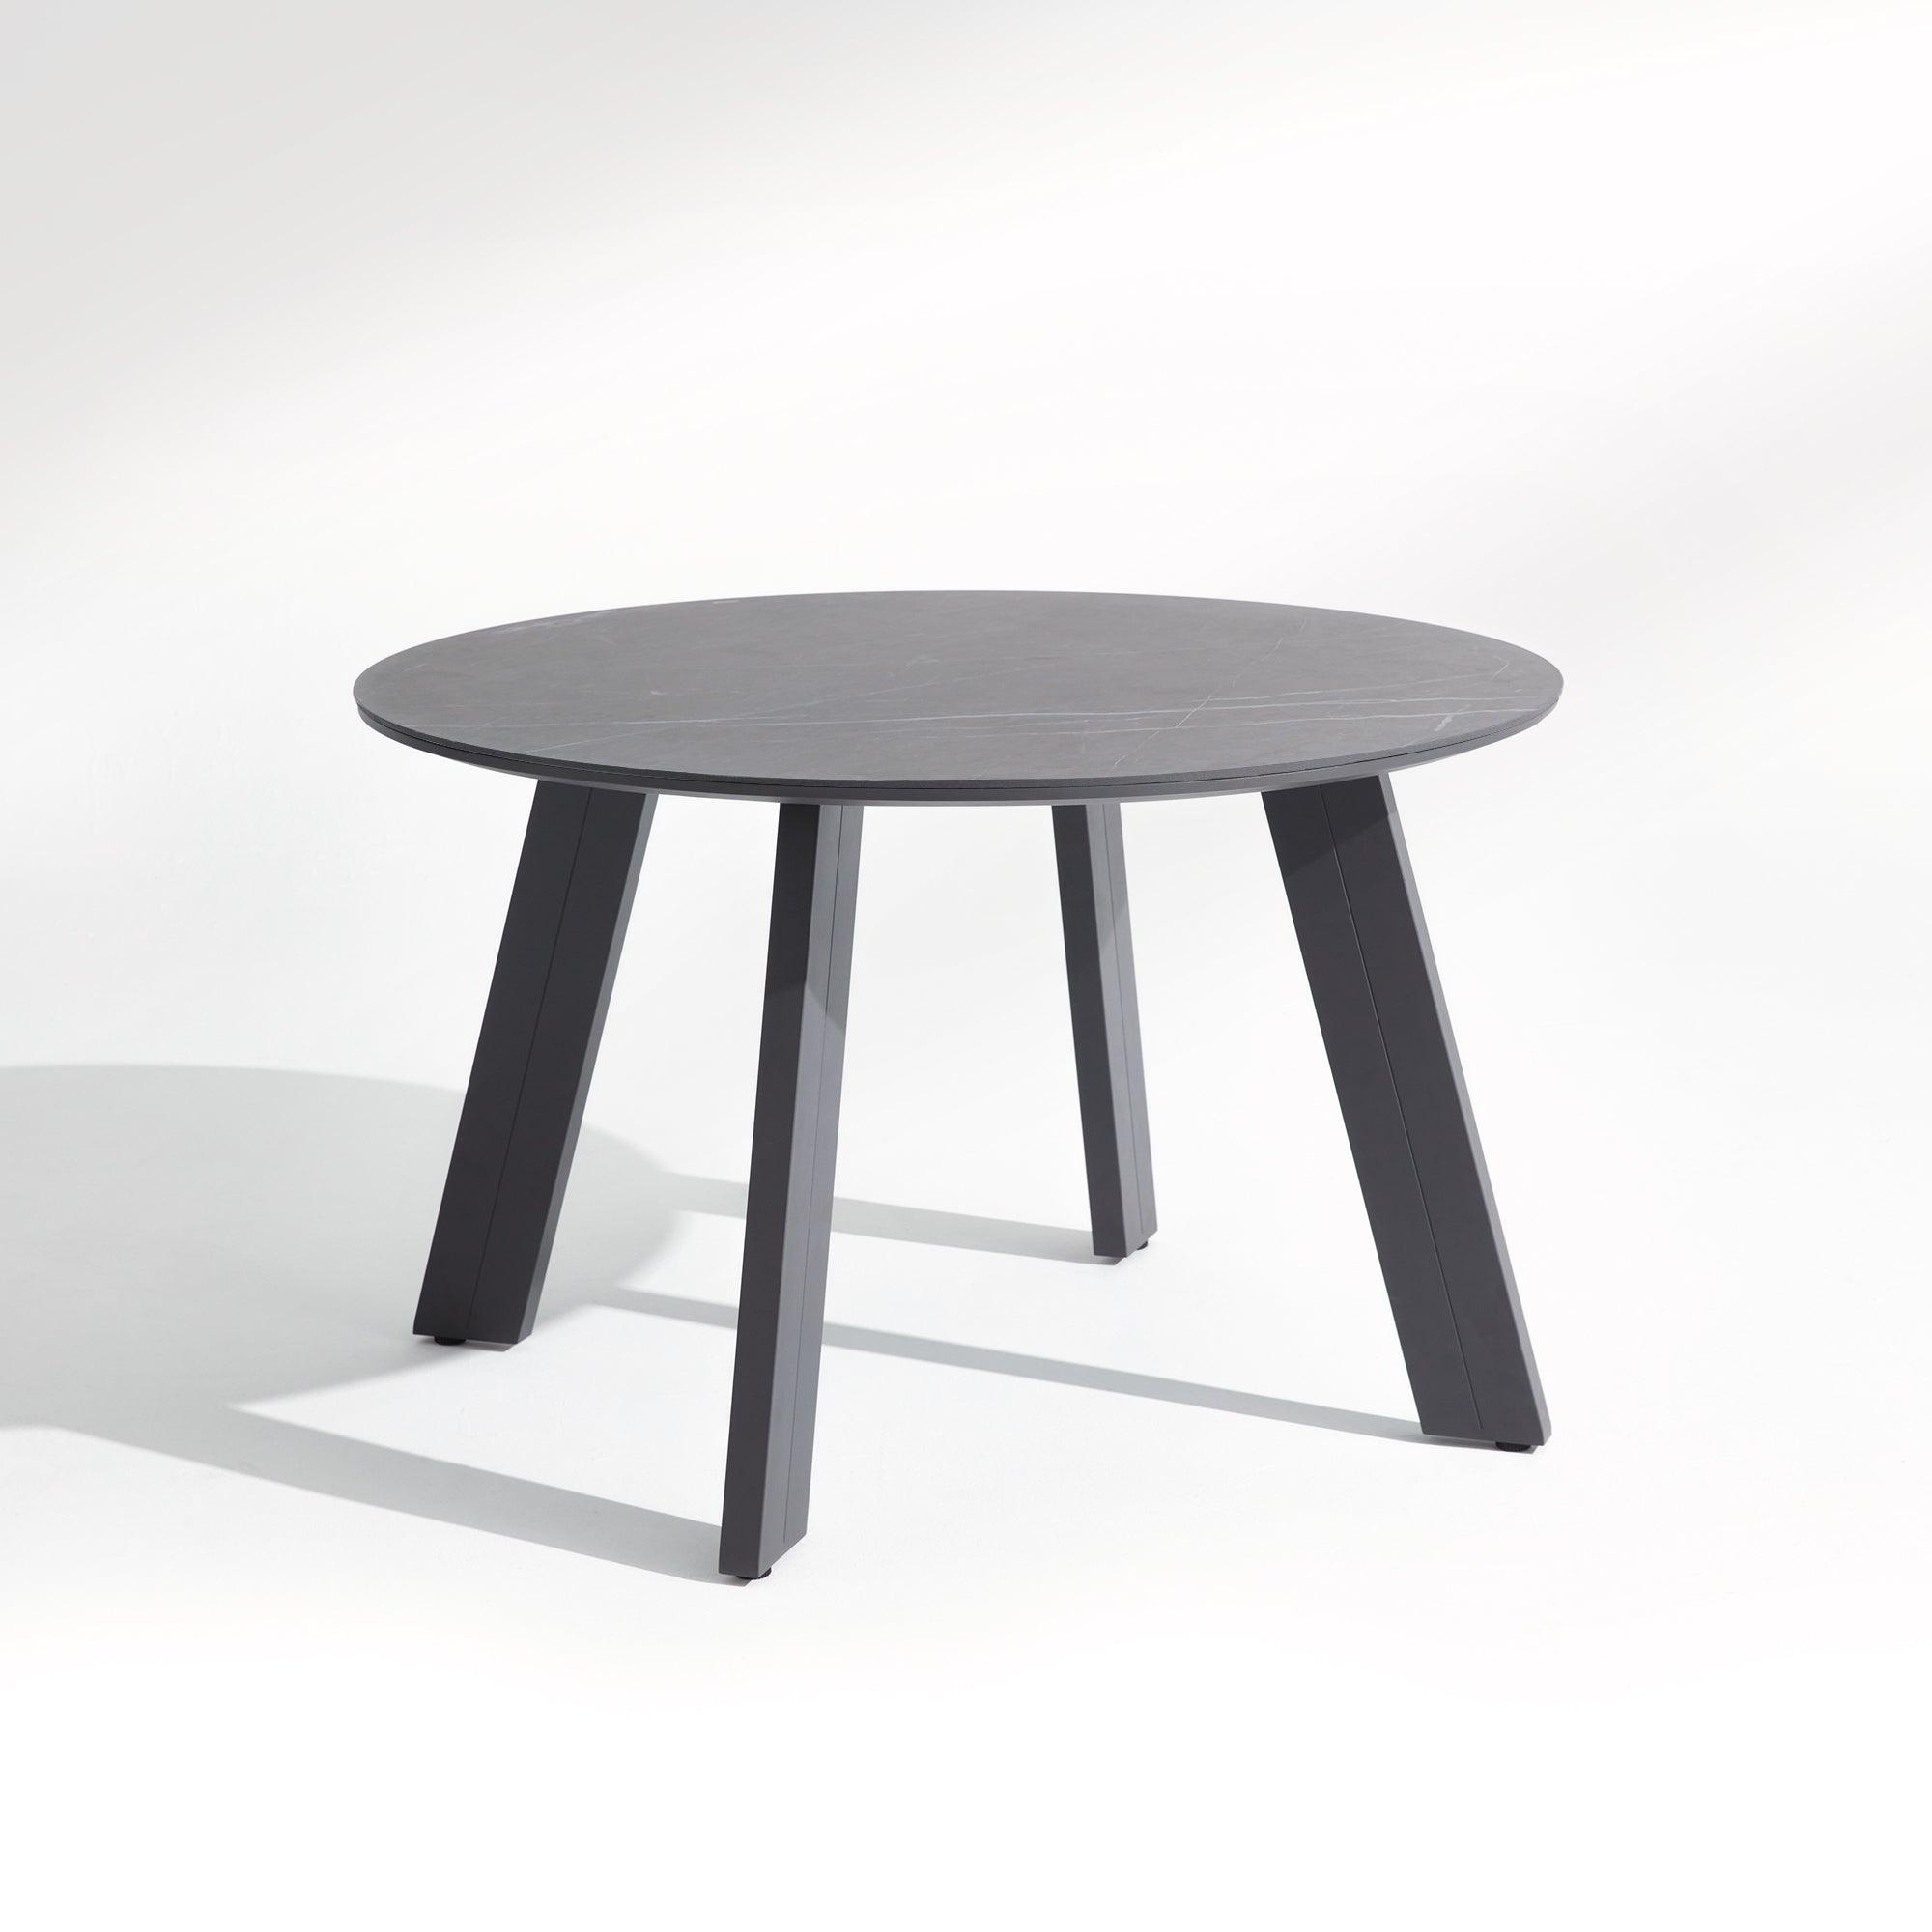 Wonder-Dining table for 4 people, aluminum frame,grey finish, sintered stone tabletop front view - Sunsitt Signature